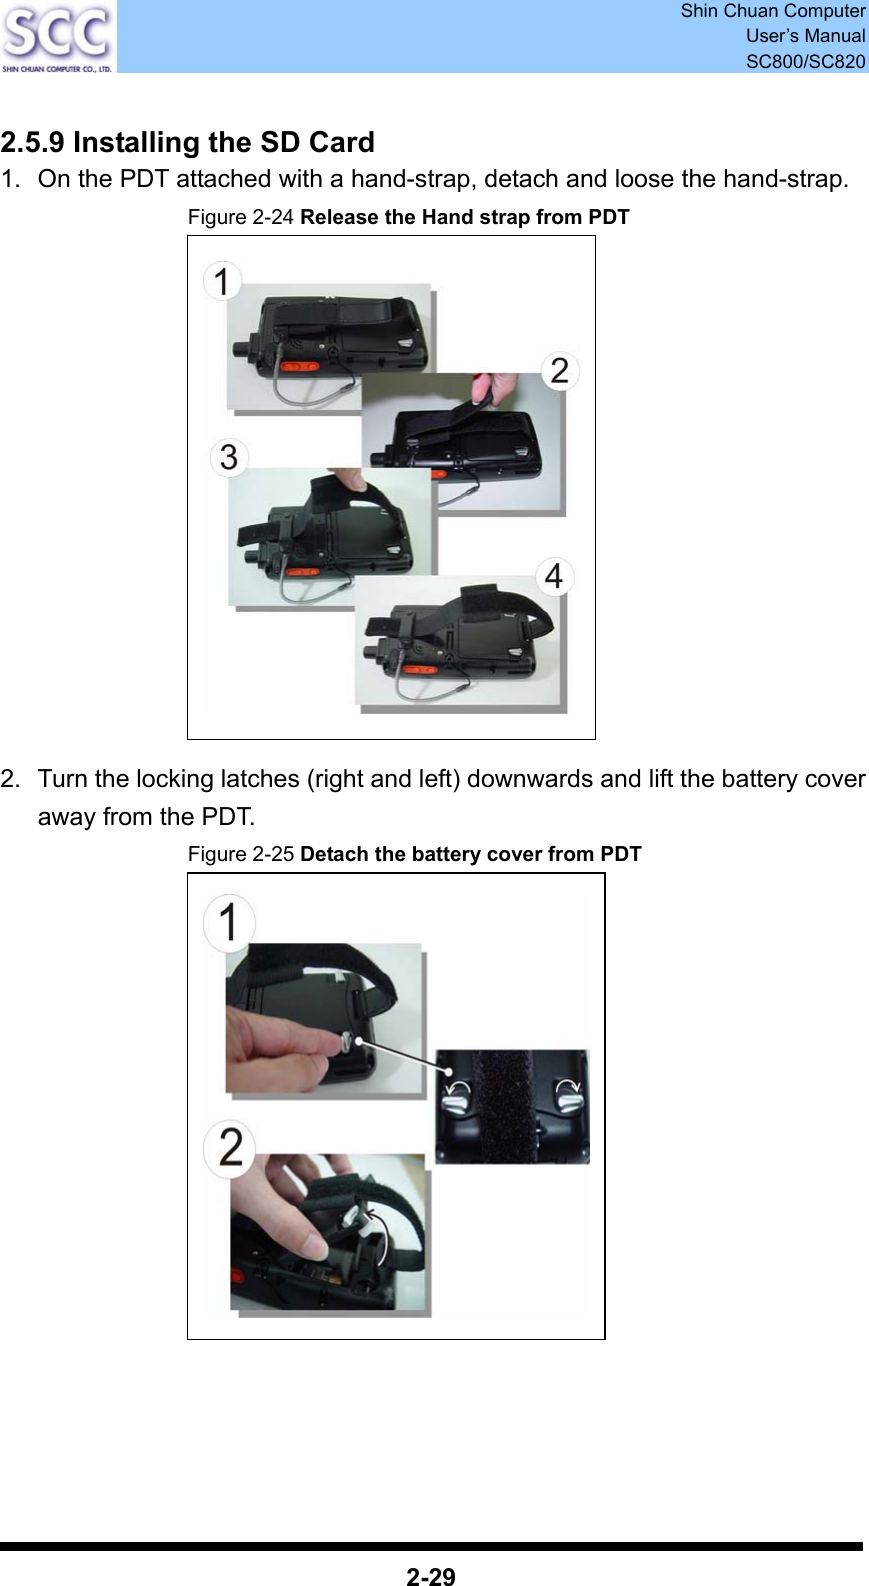  Shin Chuan Computer User’s Manual SC800/SC820  2-29  2.5.9 Installing the SD Card 1.  On the PDT attached with a hand-strap, detach and loose the hand-strap. Figure 2-24 Release the Hand strap from PDT               2.  Turn the locking latches (right and left) downwards and lift the battery cover away from the PDT. Figure 2-25 Detach the battery cover from PDT                  